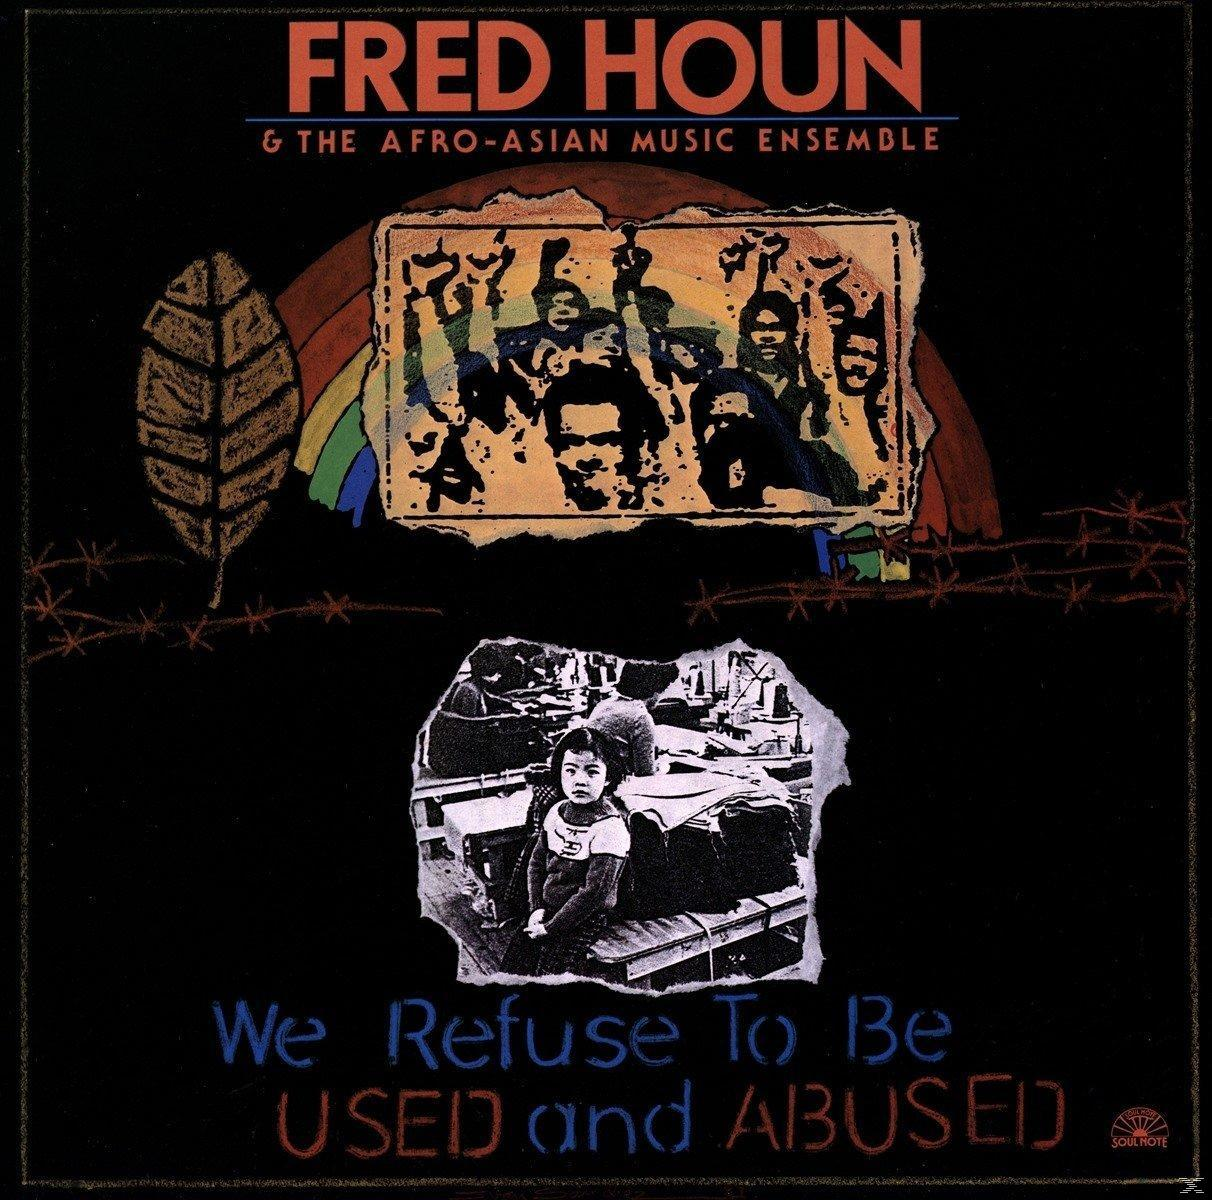 - Fred Afro-Asian We Music To Used Houn Be The Ensemble, Refuse Abuse - And (Vinyl)